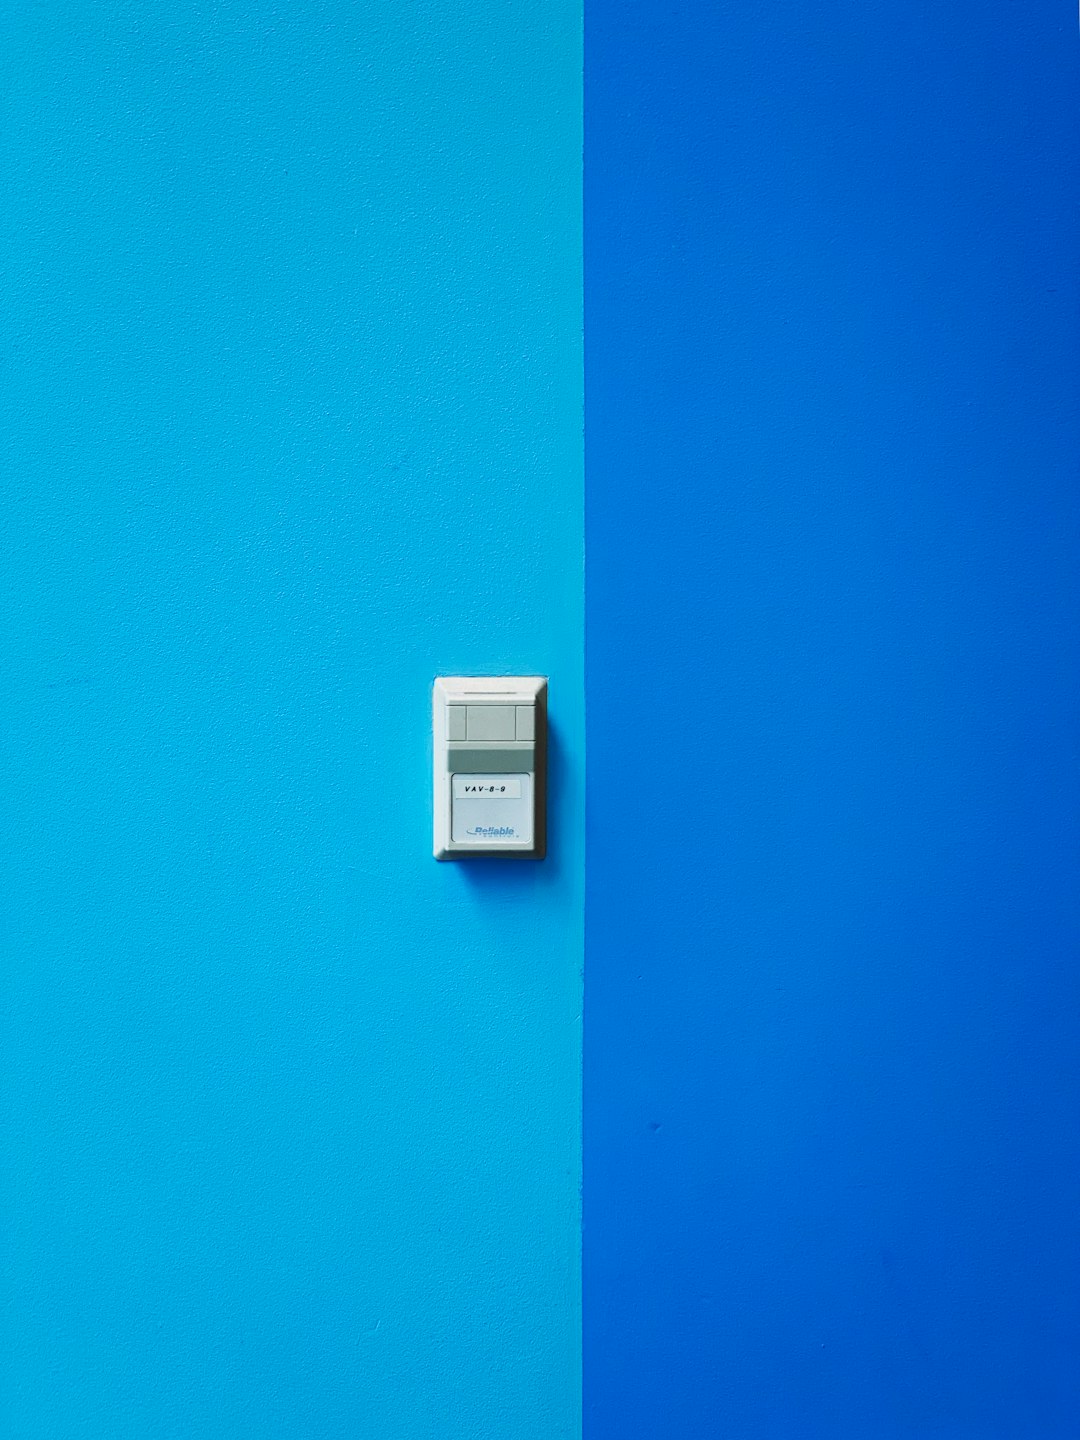 white wall mounted device on blue wall